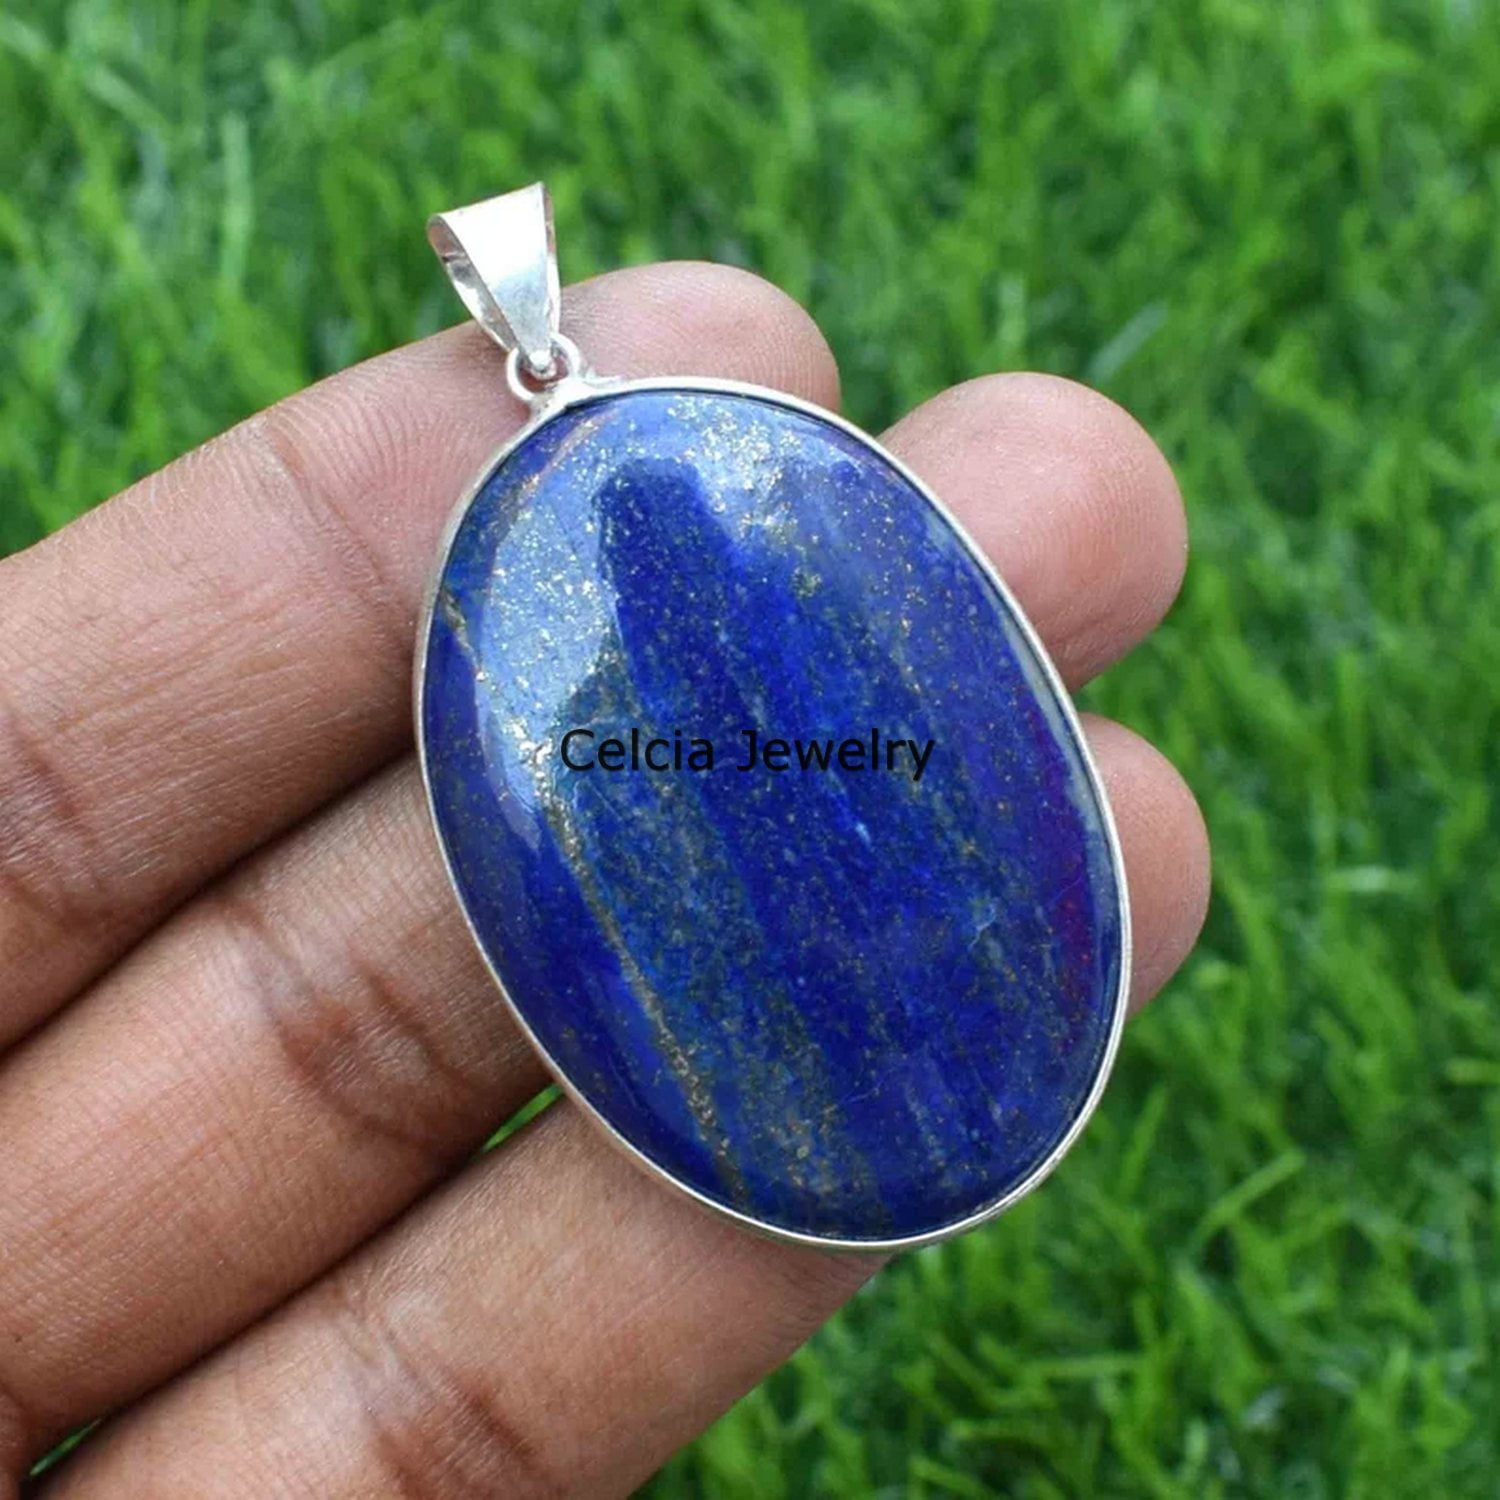 Top Natural Royal Blue Lapis Lazuli Necklace Pendant For Women Men Wealth  Healing Crystal Gift Silver Beads Stone Jewelry Aaaaa - Pendants -  AliExpress